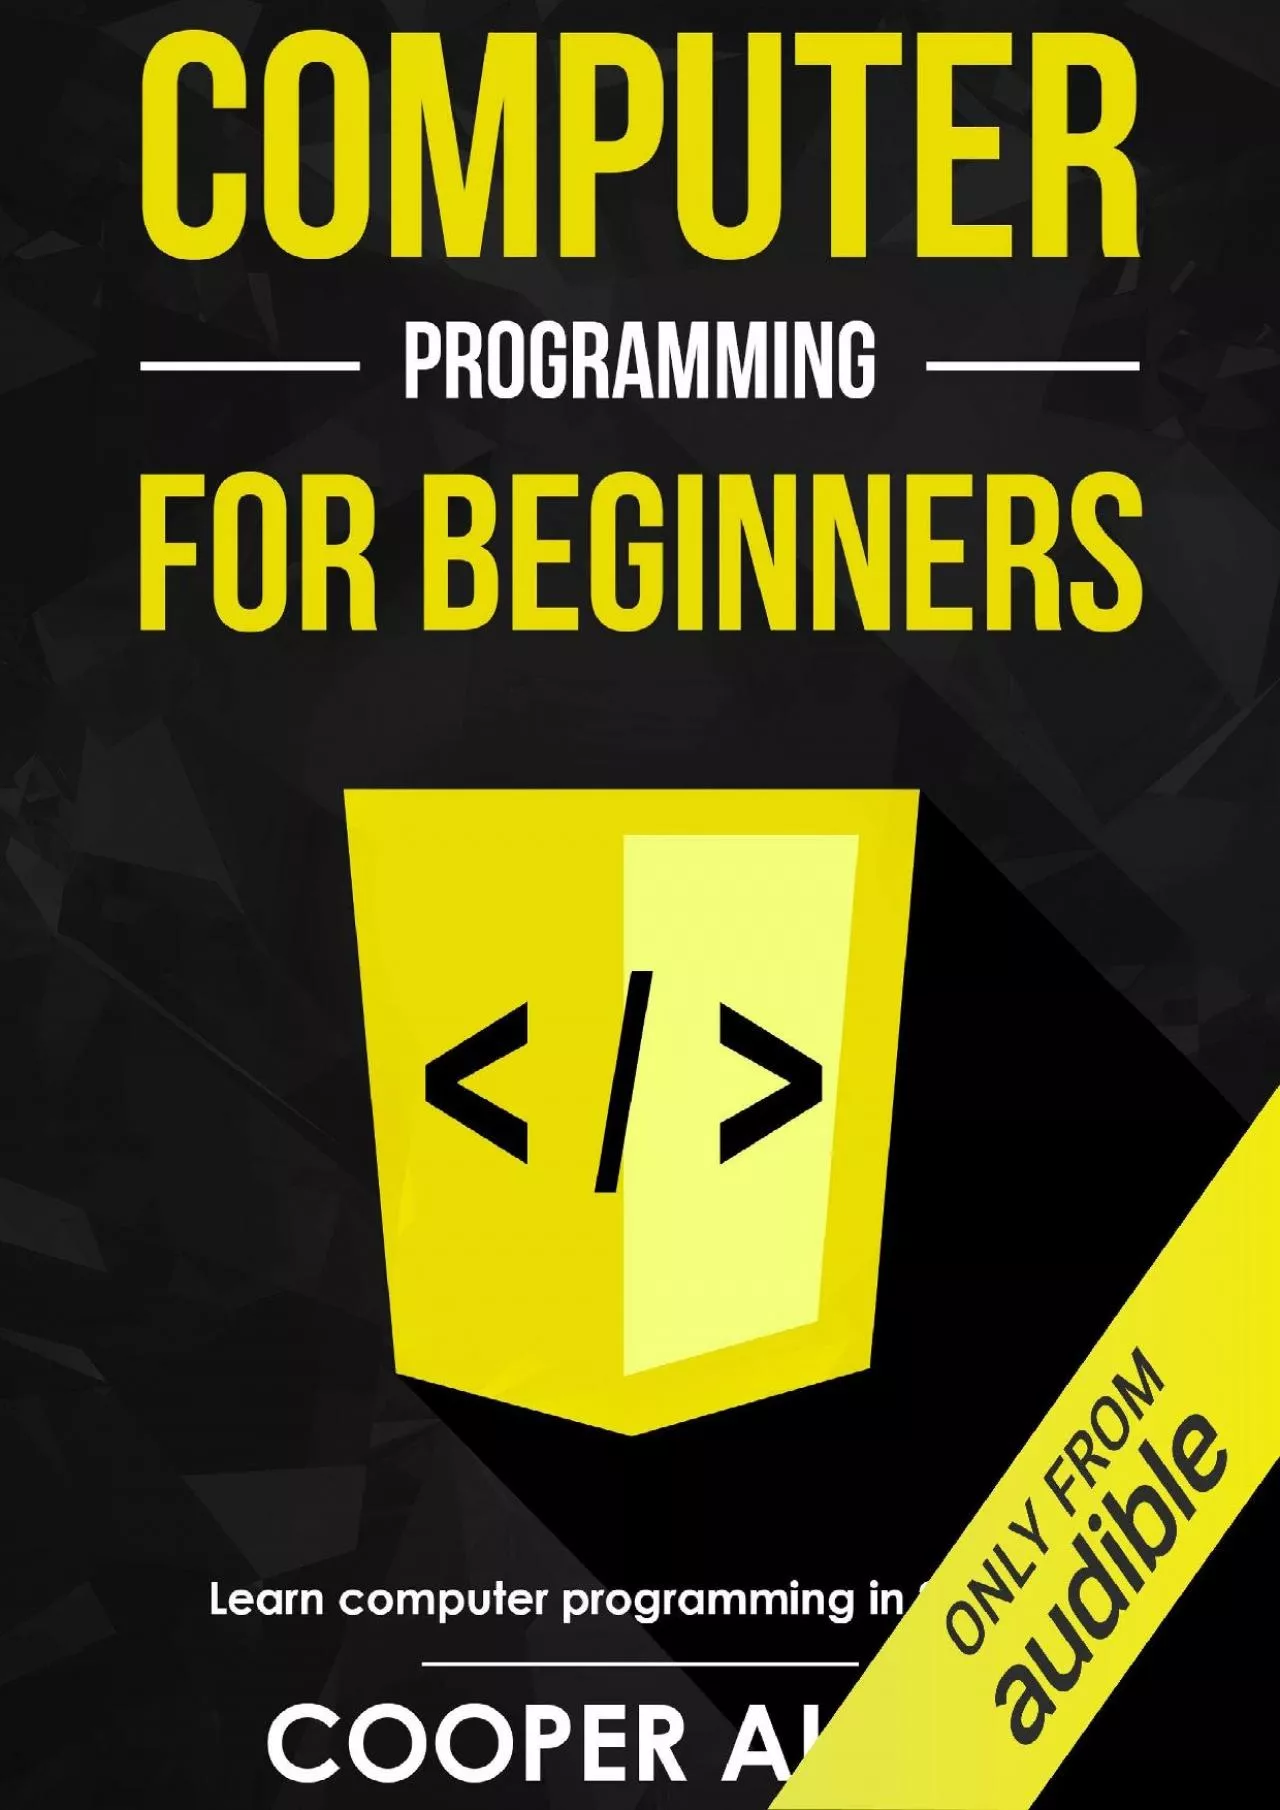 [DOWLOAD]-Computer Programming for Beginners: Learn the Basics of Java, SQL, C, C++, C,